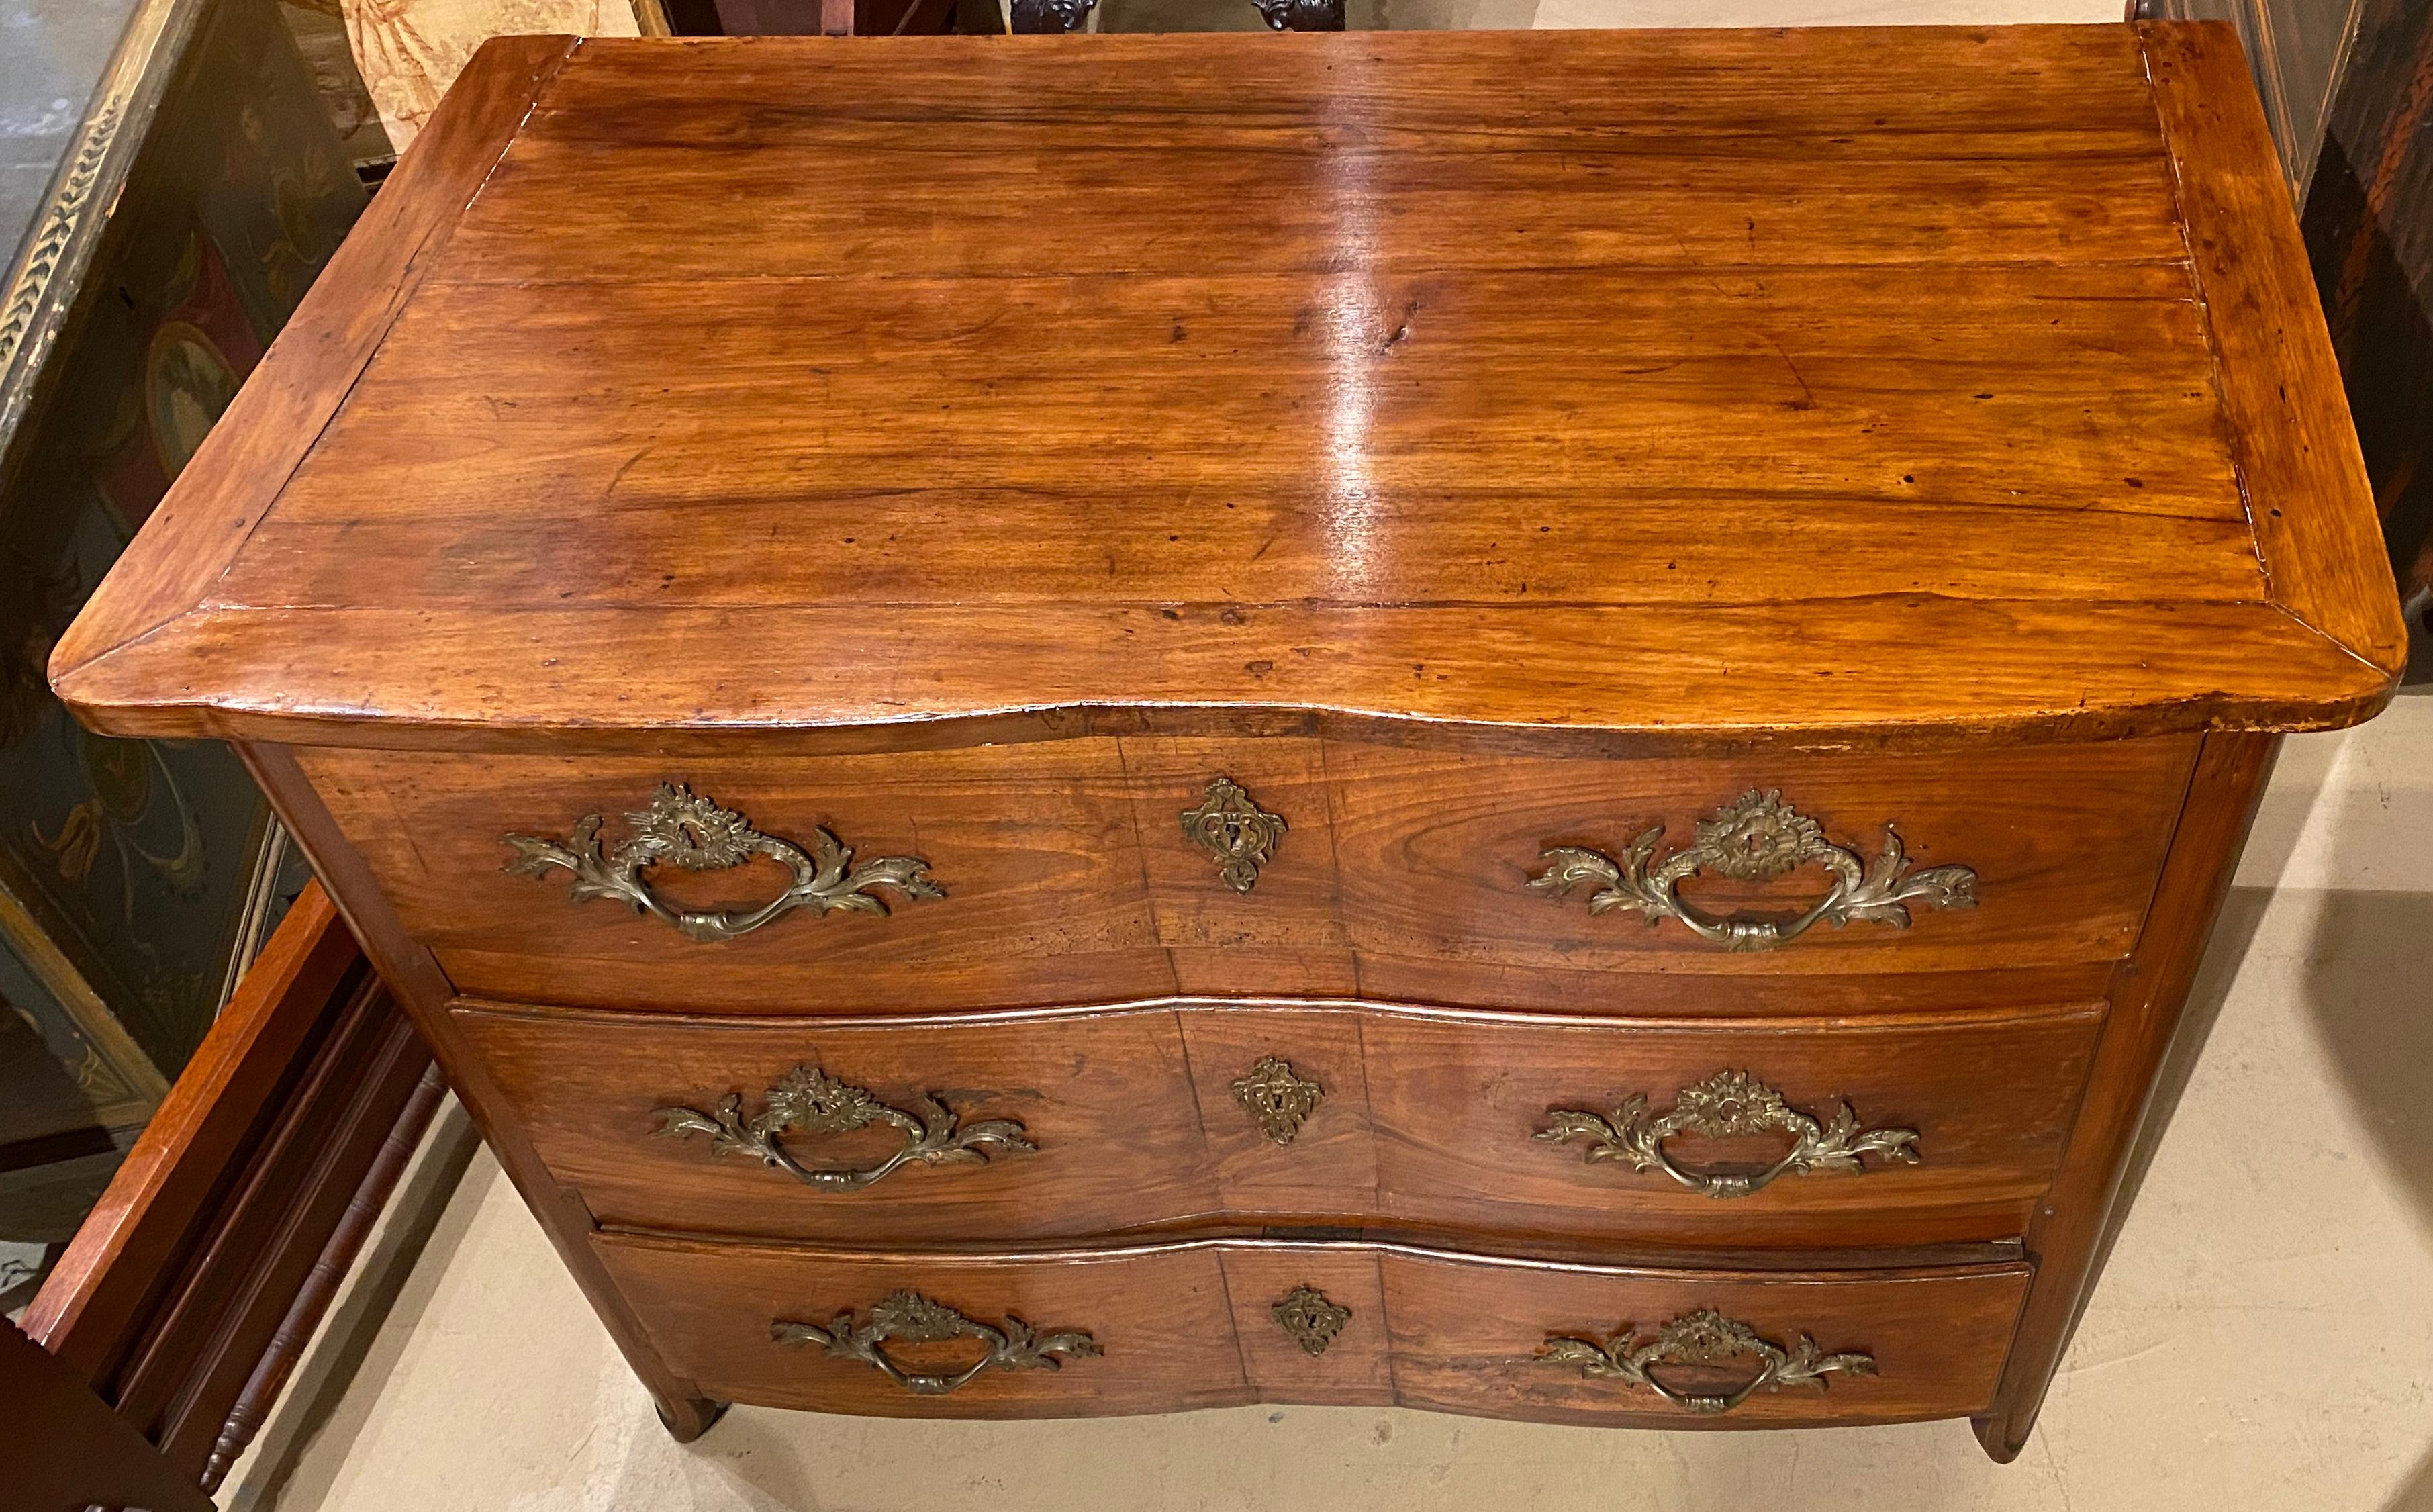 A fine provincial walnut three drawer commode with shaped top and conforming case, scrolled brass or bronze pulls and escutcheons (probably original), raised panel drawer fronts and side panels, all supported by two front short splayed carved feet.